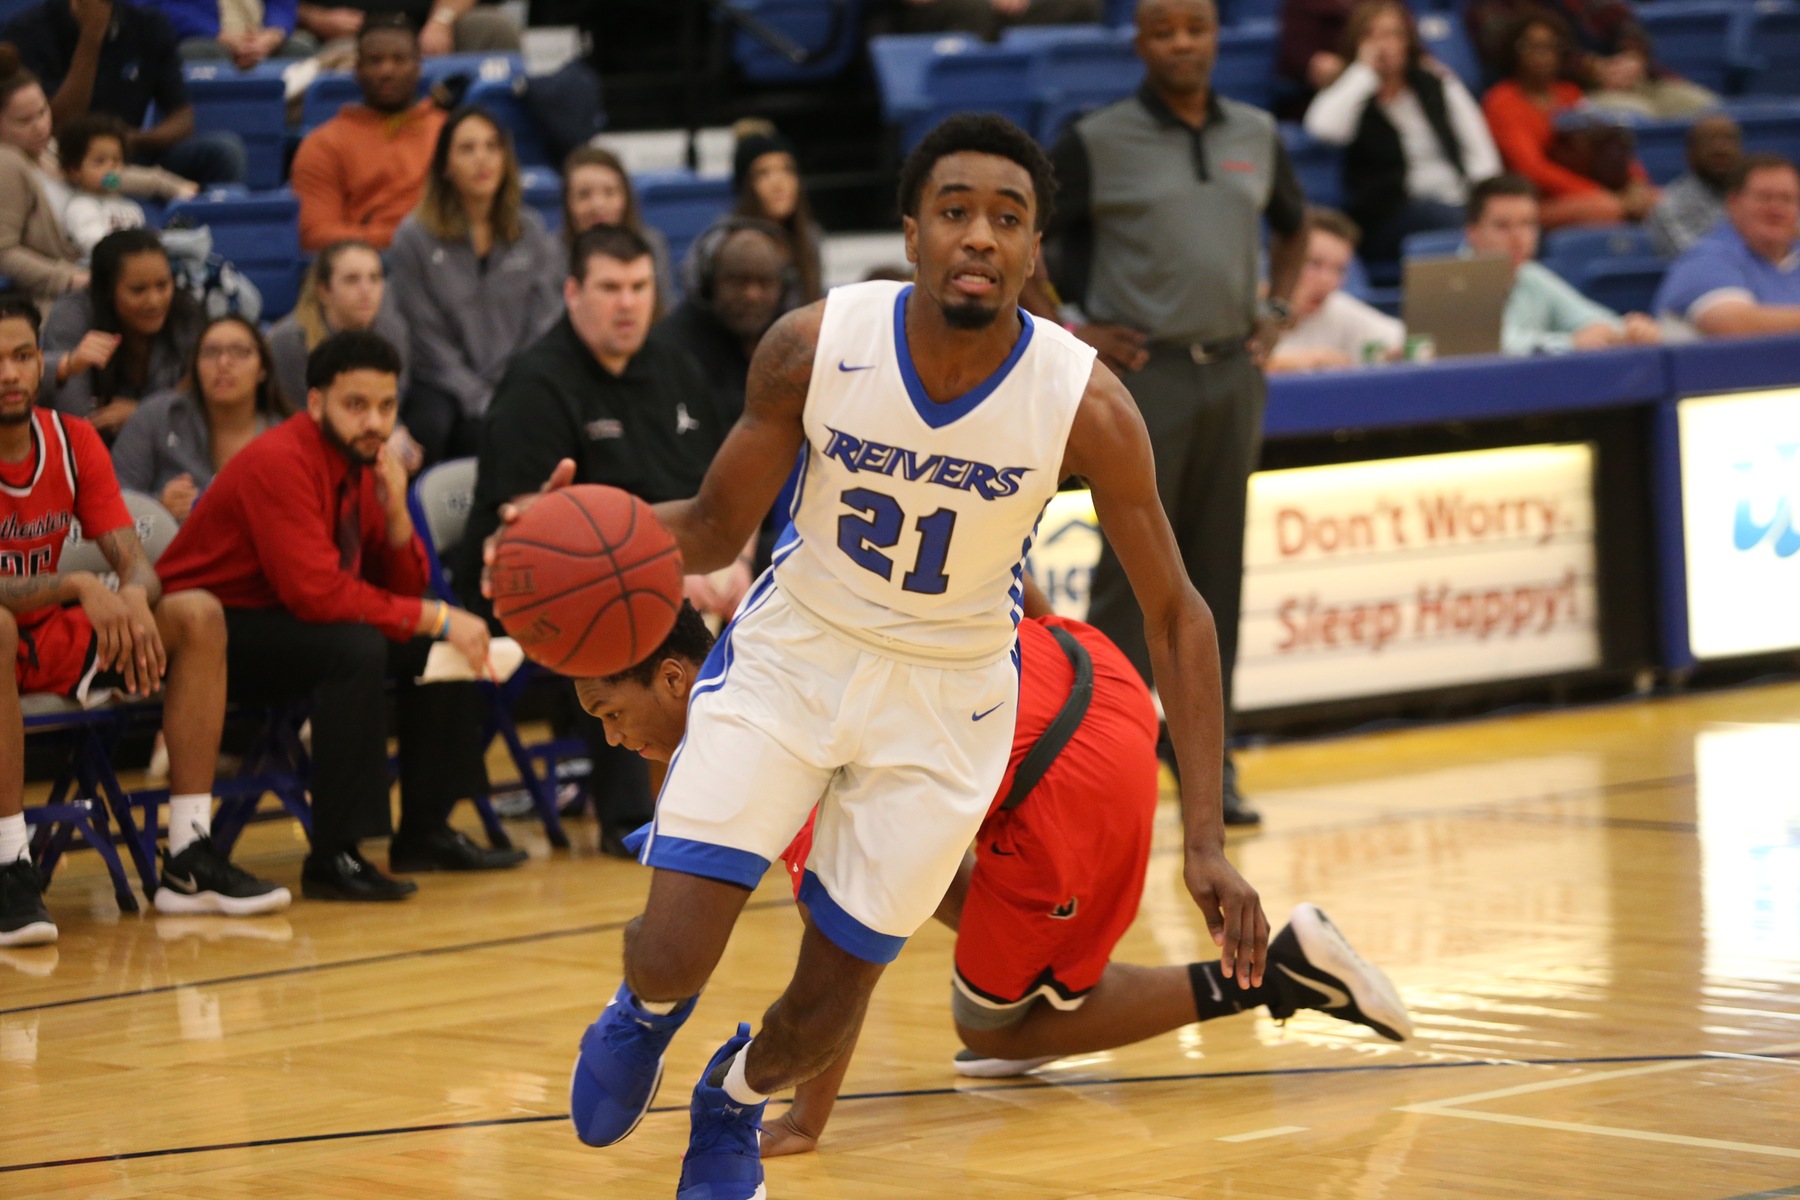 Shaun Doss scored all of his 13 points in the second half as Iowa Western's "second wave" outscored Northeast 32-8 in points off the bench enroute to the Reivers 20th win of the year.